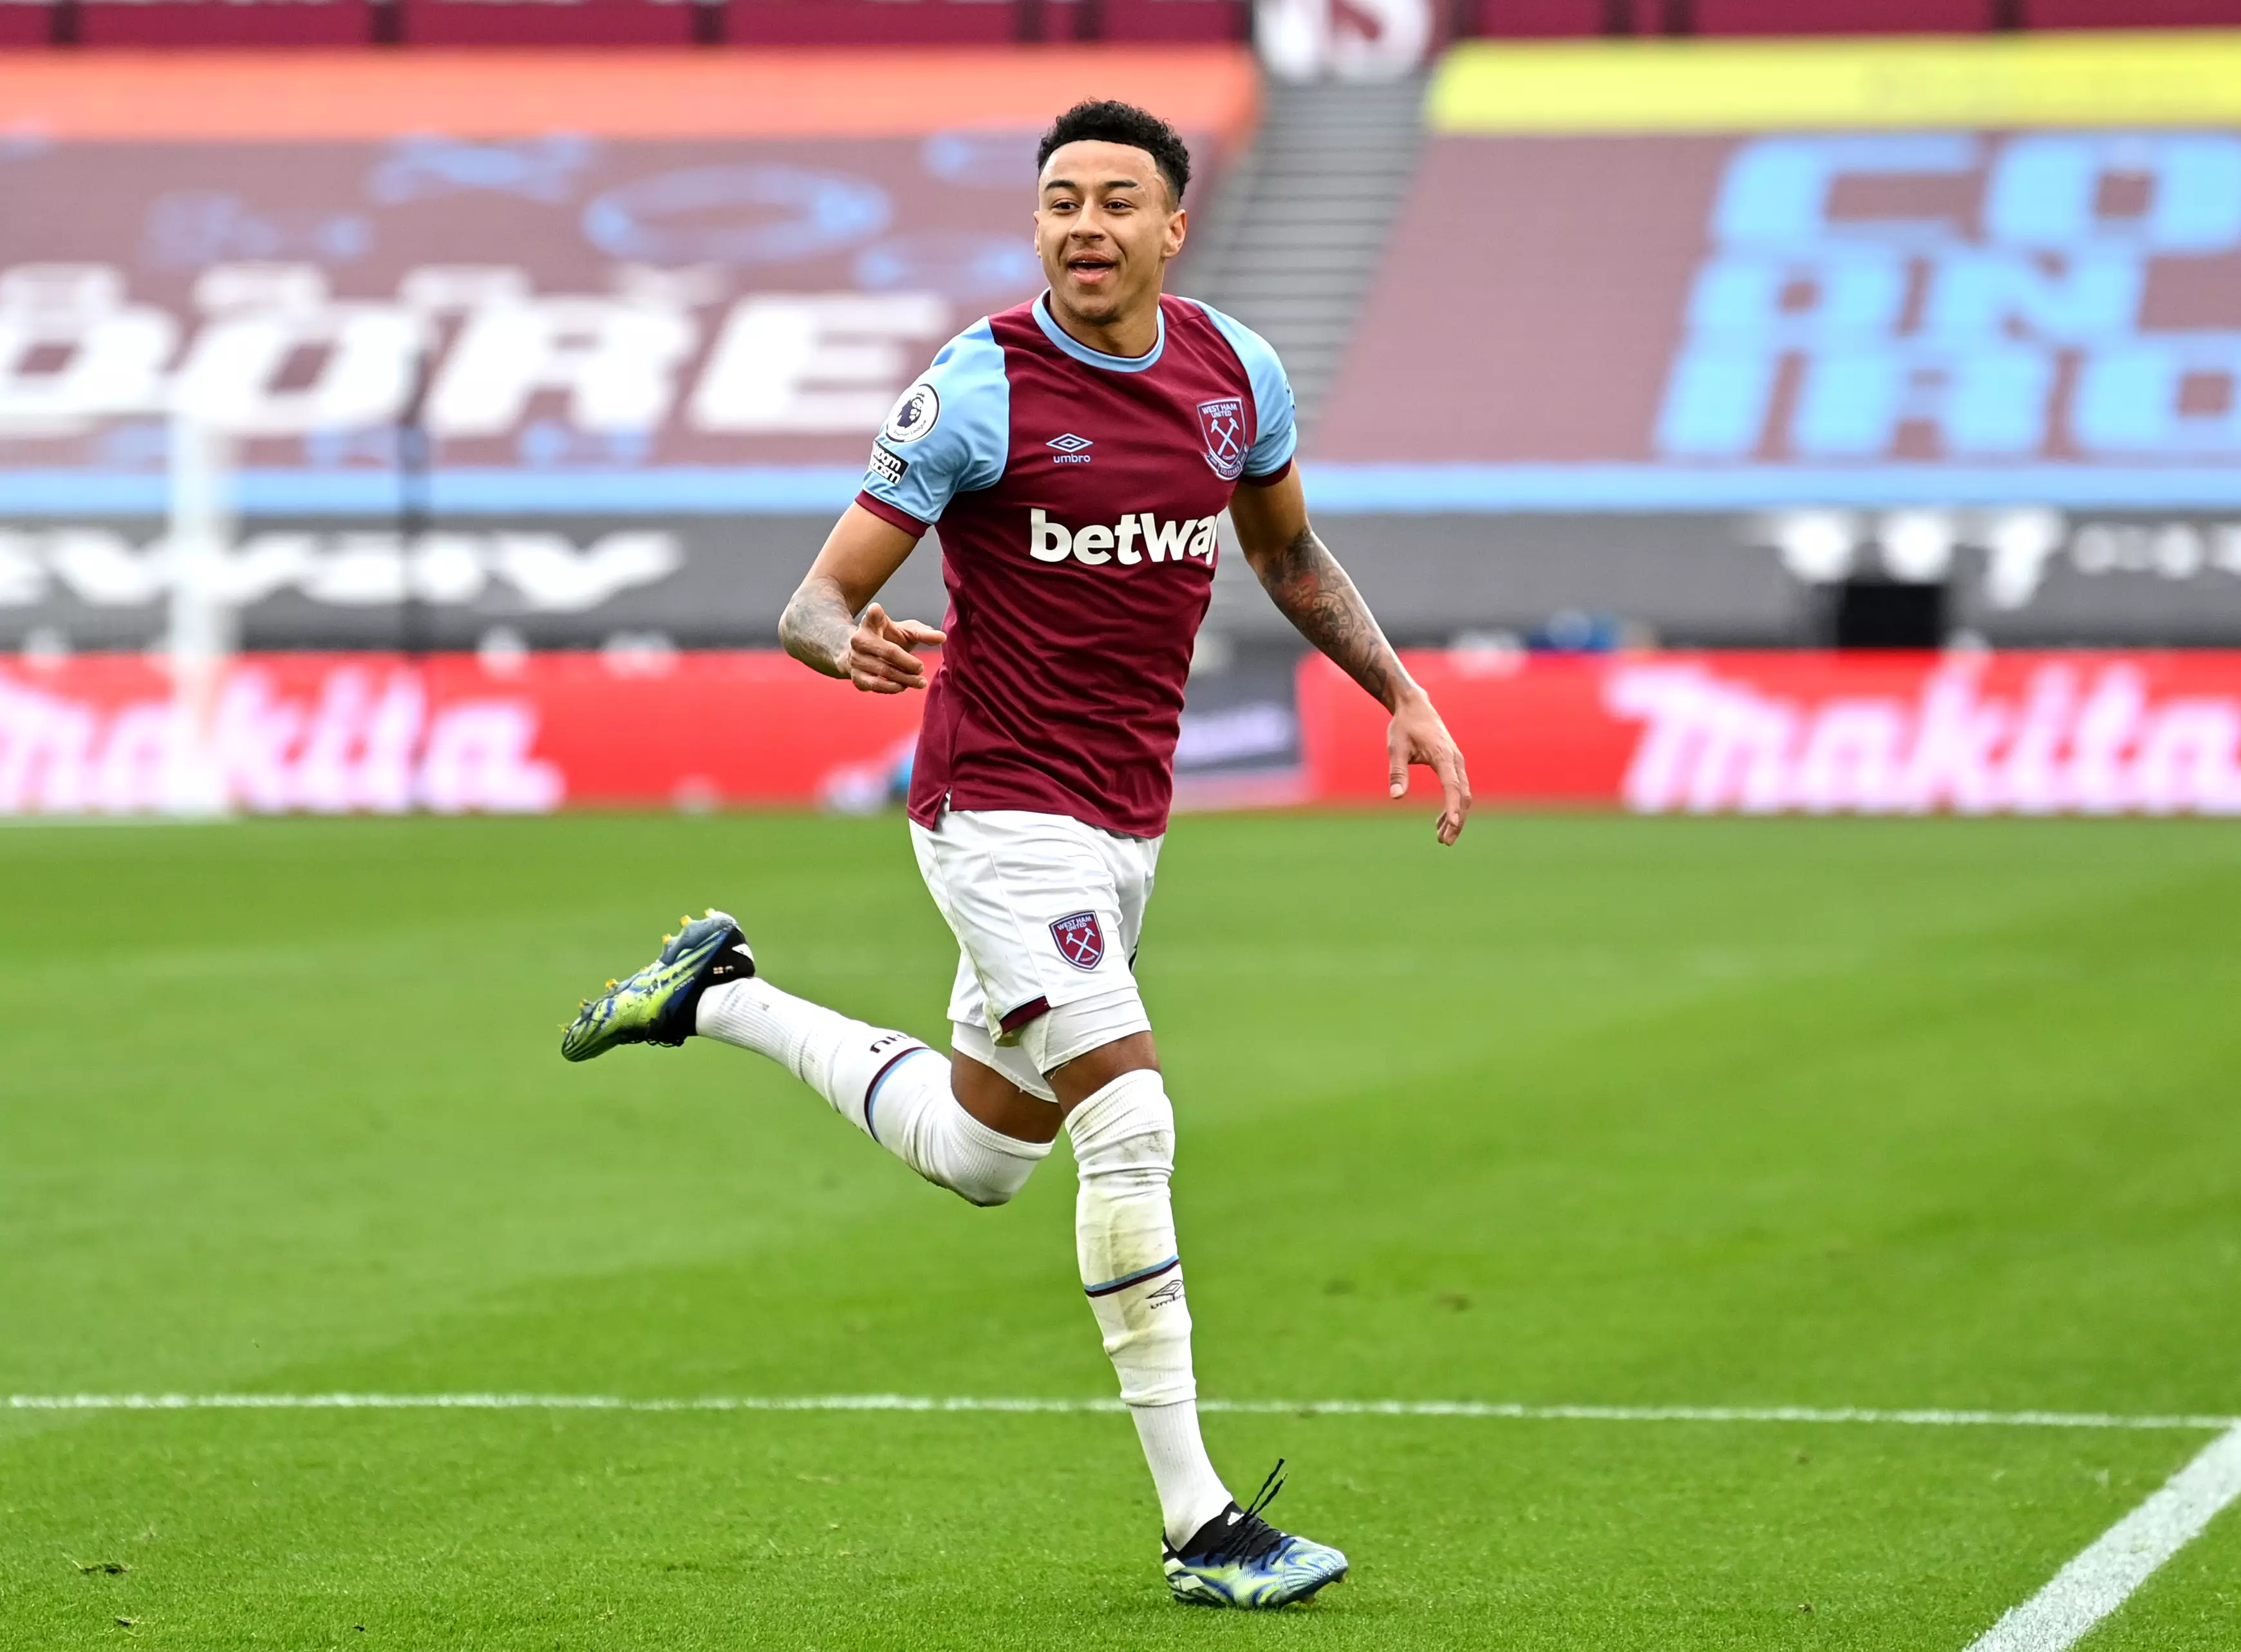 Lingard has been in brilliant form for West Ham. Image: PA Images